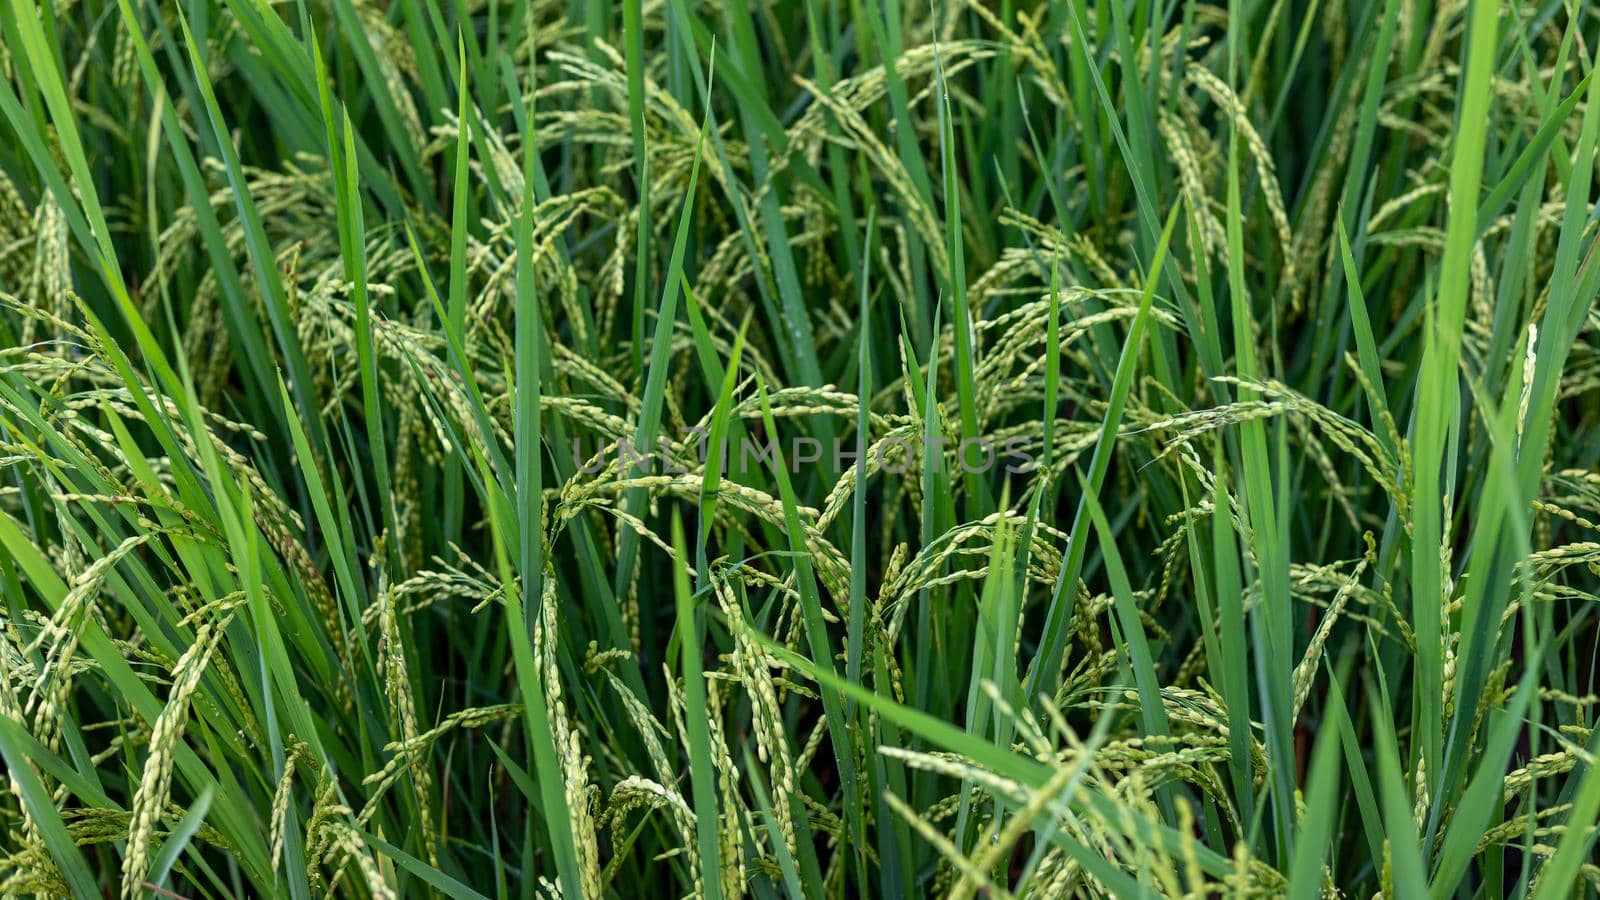 Green rice crop in the fields closeup view